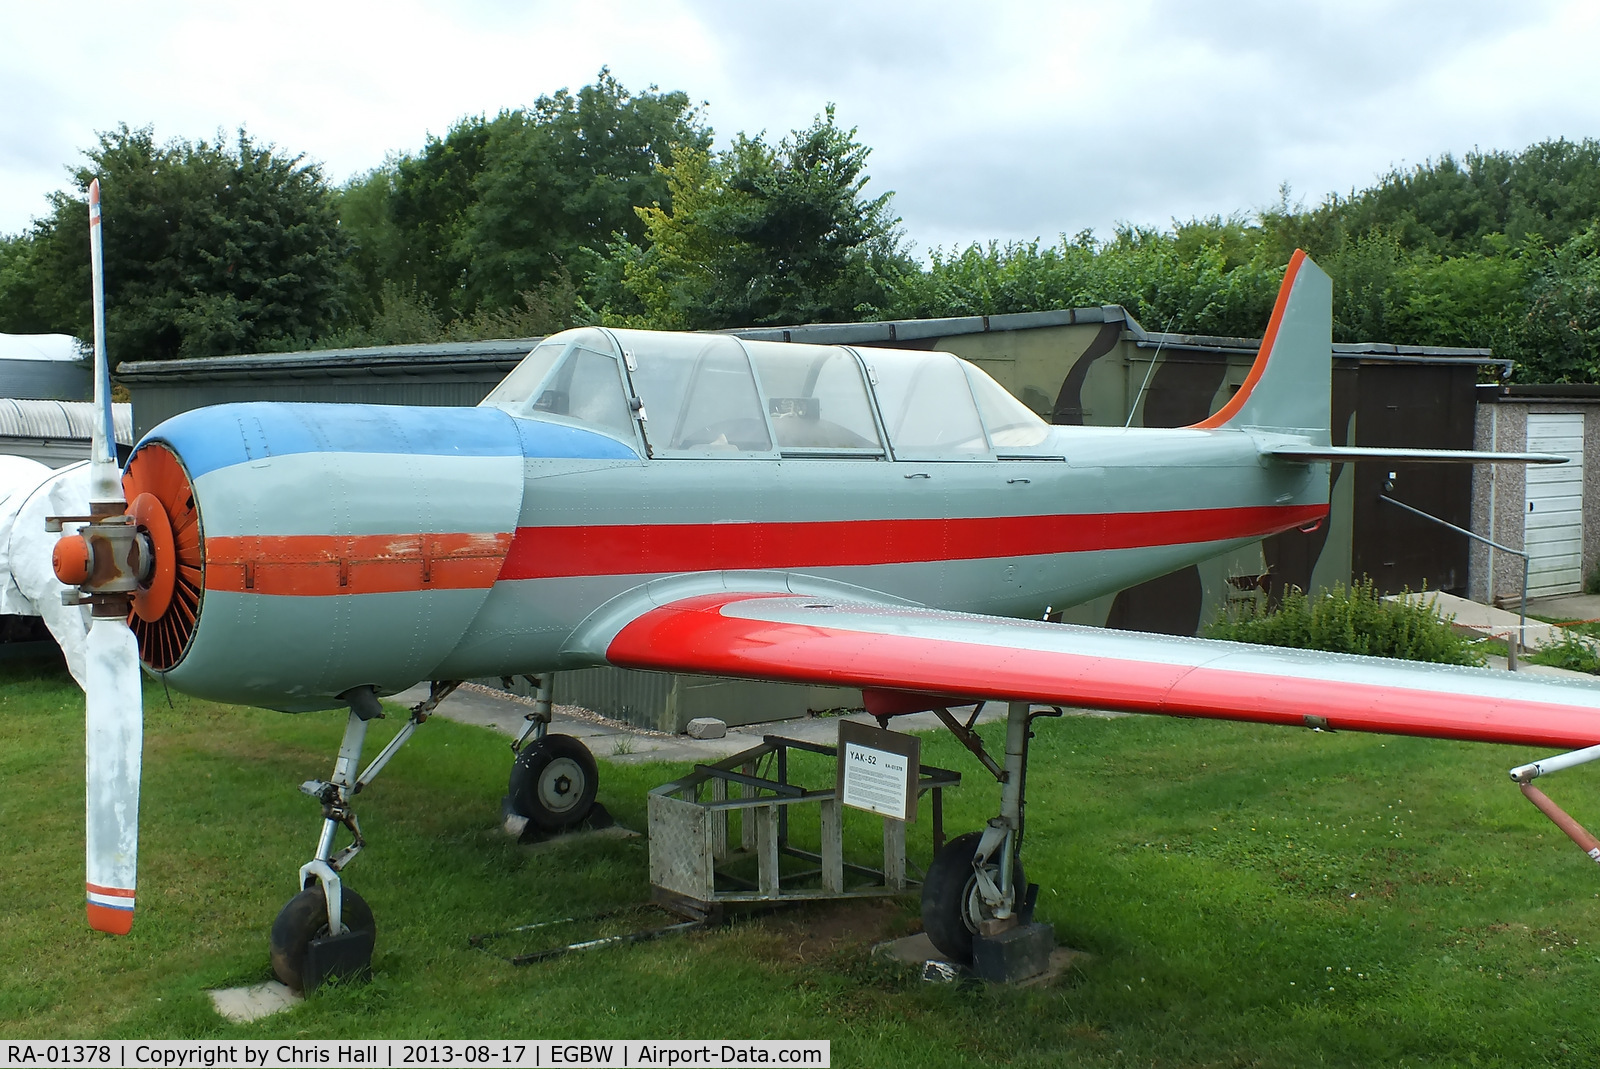 RA-01378, Yakovlev Yak-52 C/N 83 30 04, undergoing a repaint at the Wellesbourne Wartime Museum